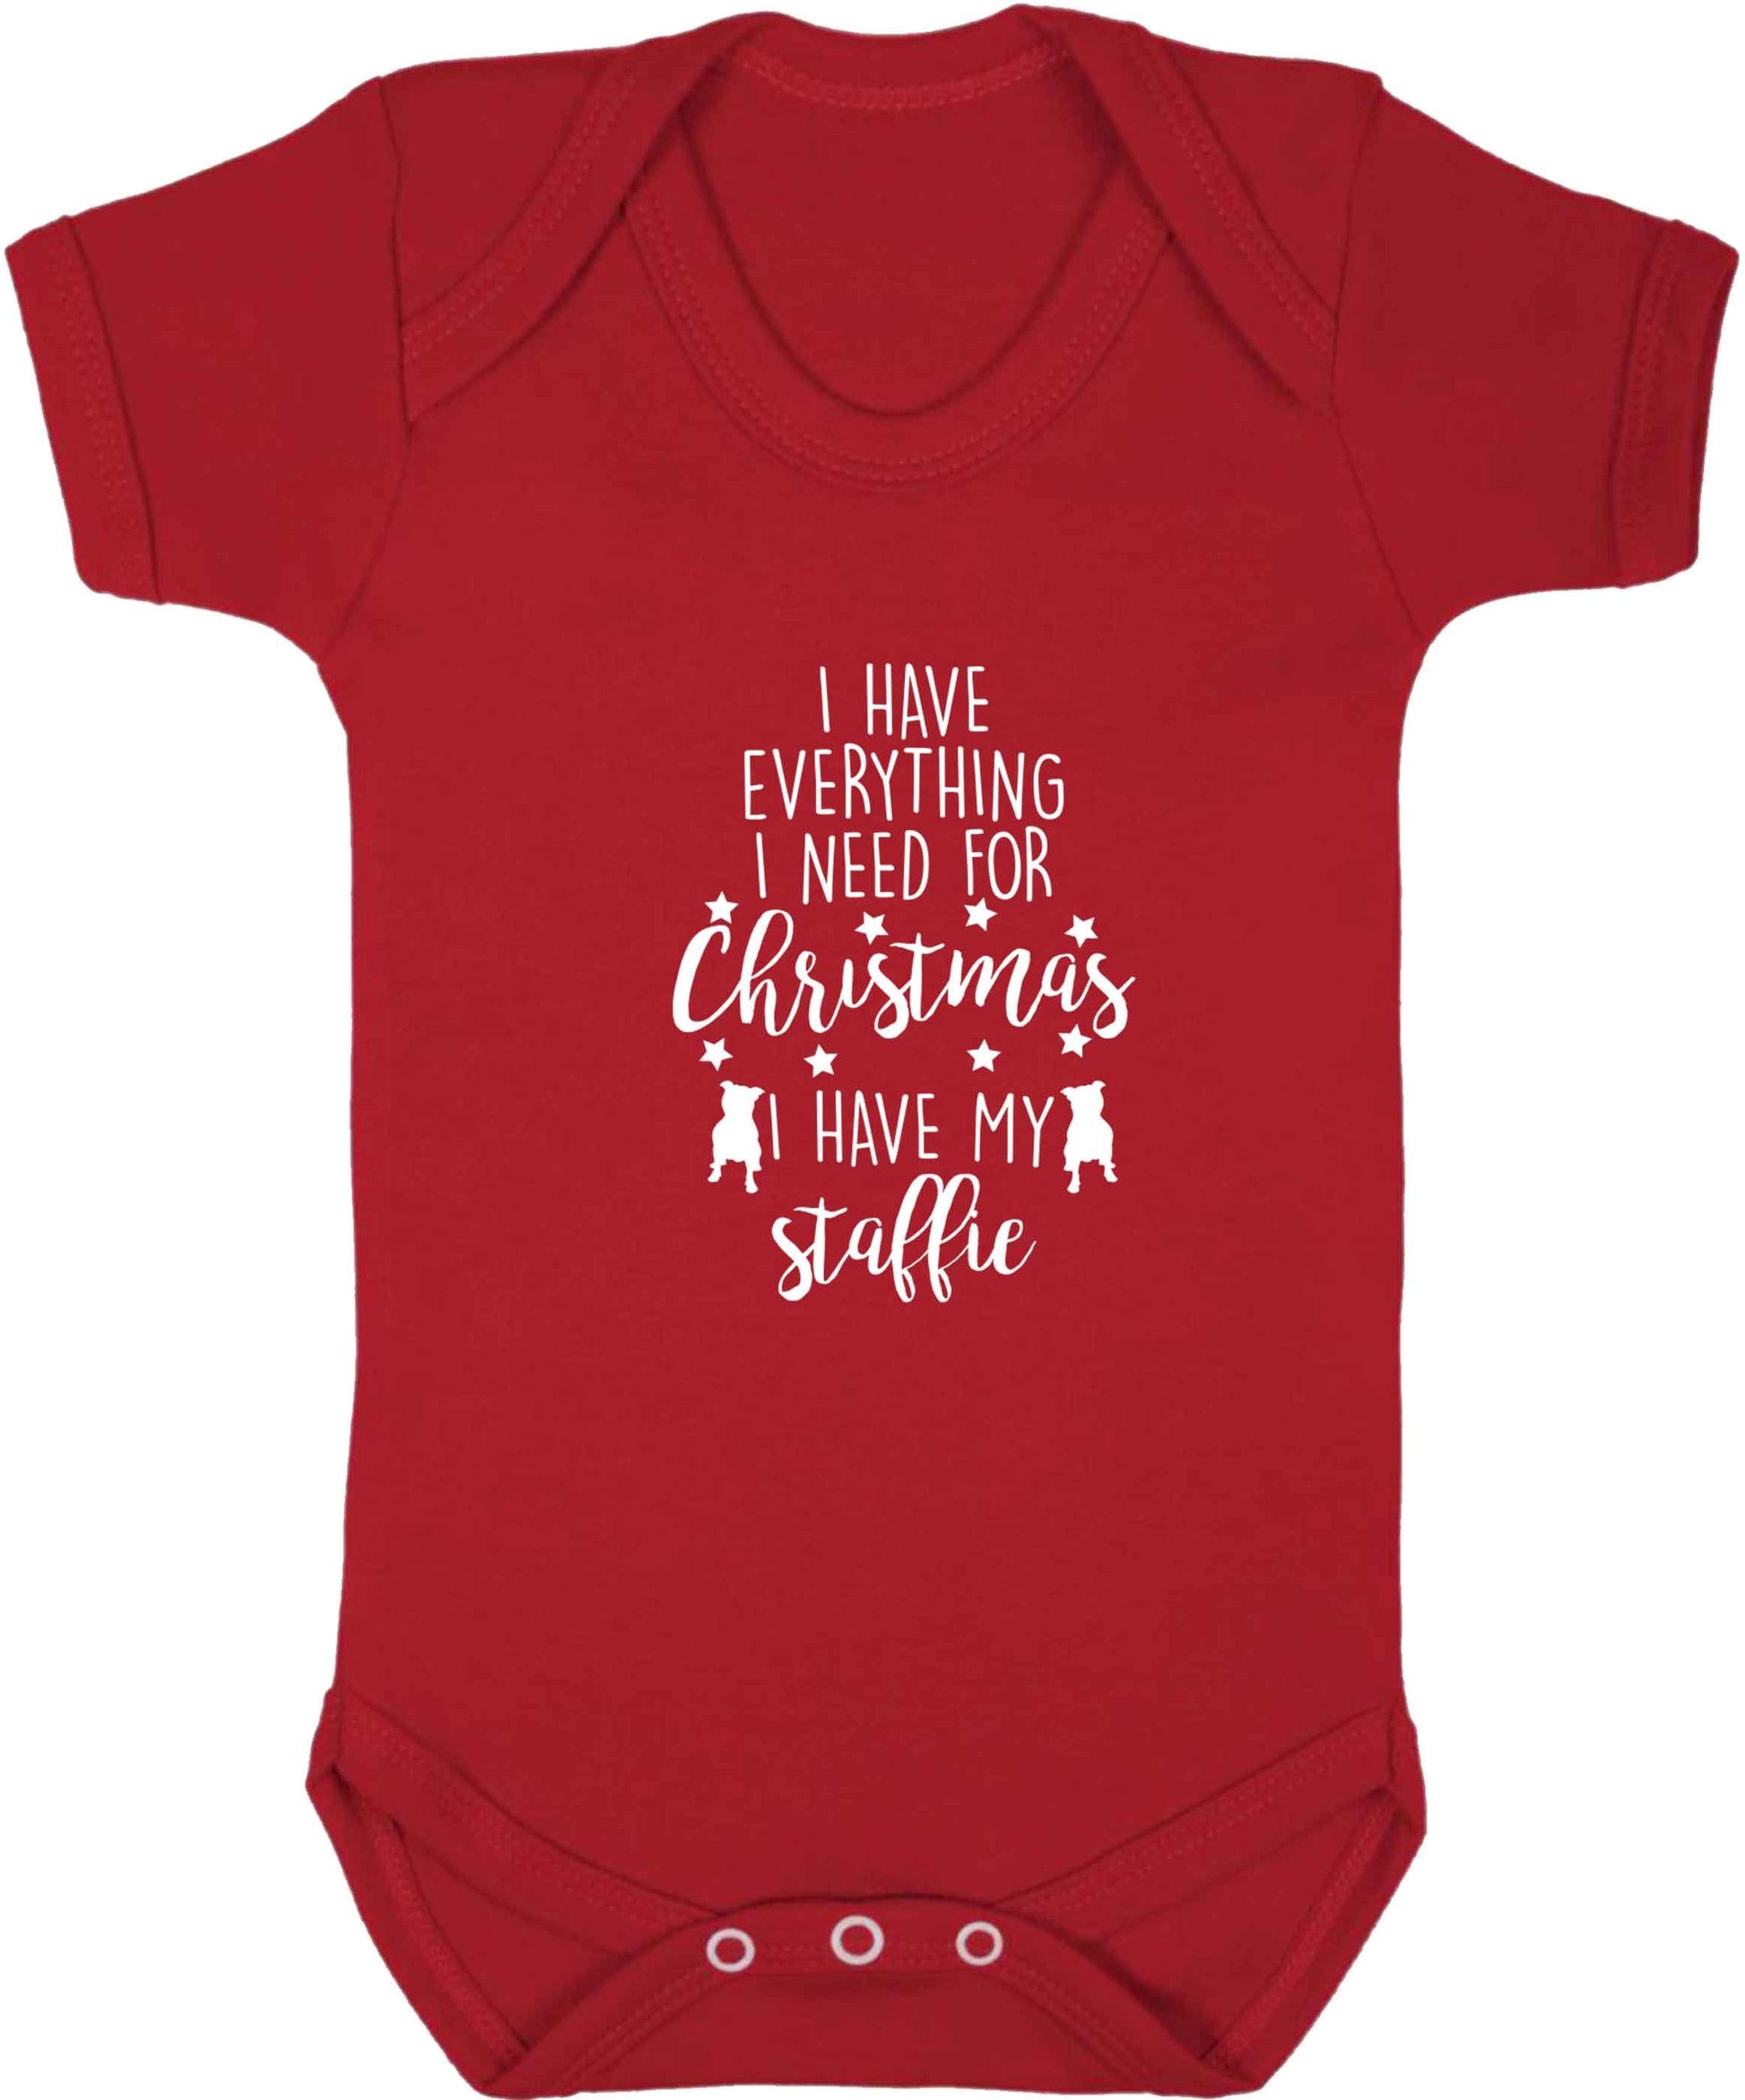 I have everything I need for Christmas I have my staffie baby vest red 18-24 months